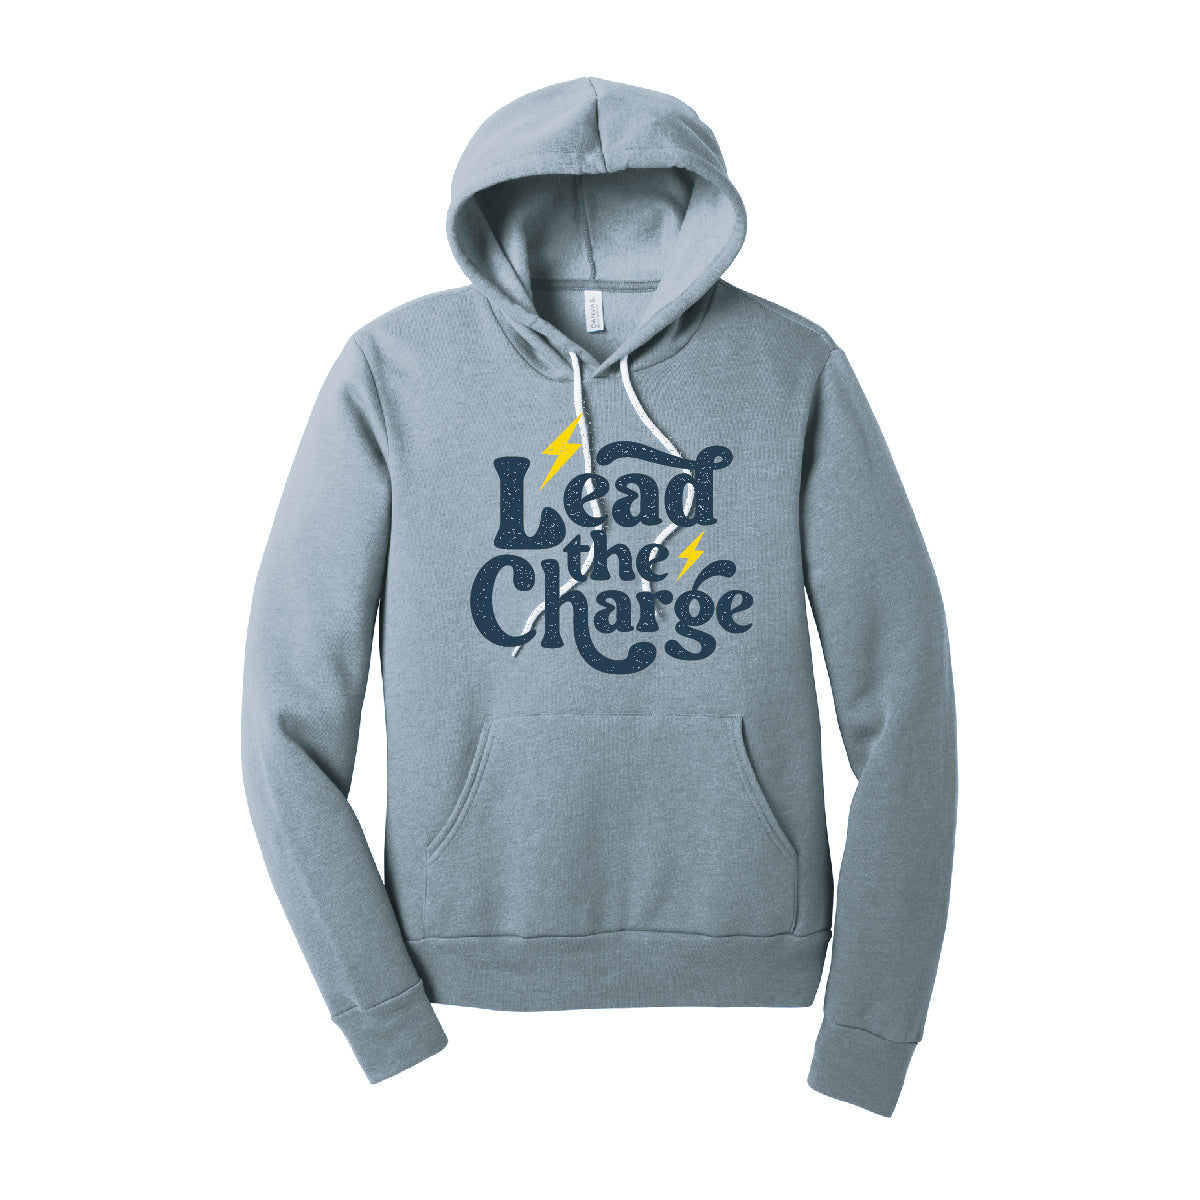 Soft Lead the Charge Hoodie